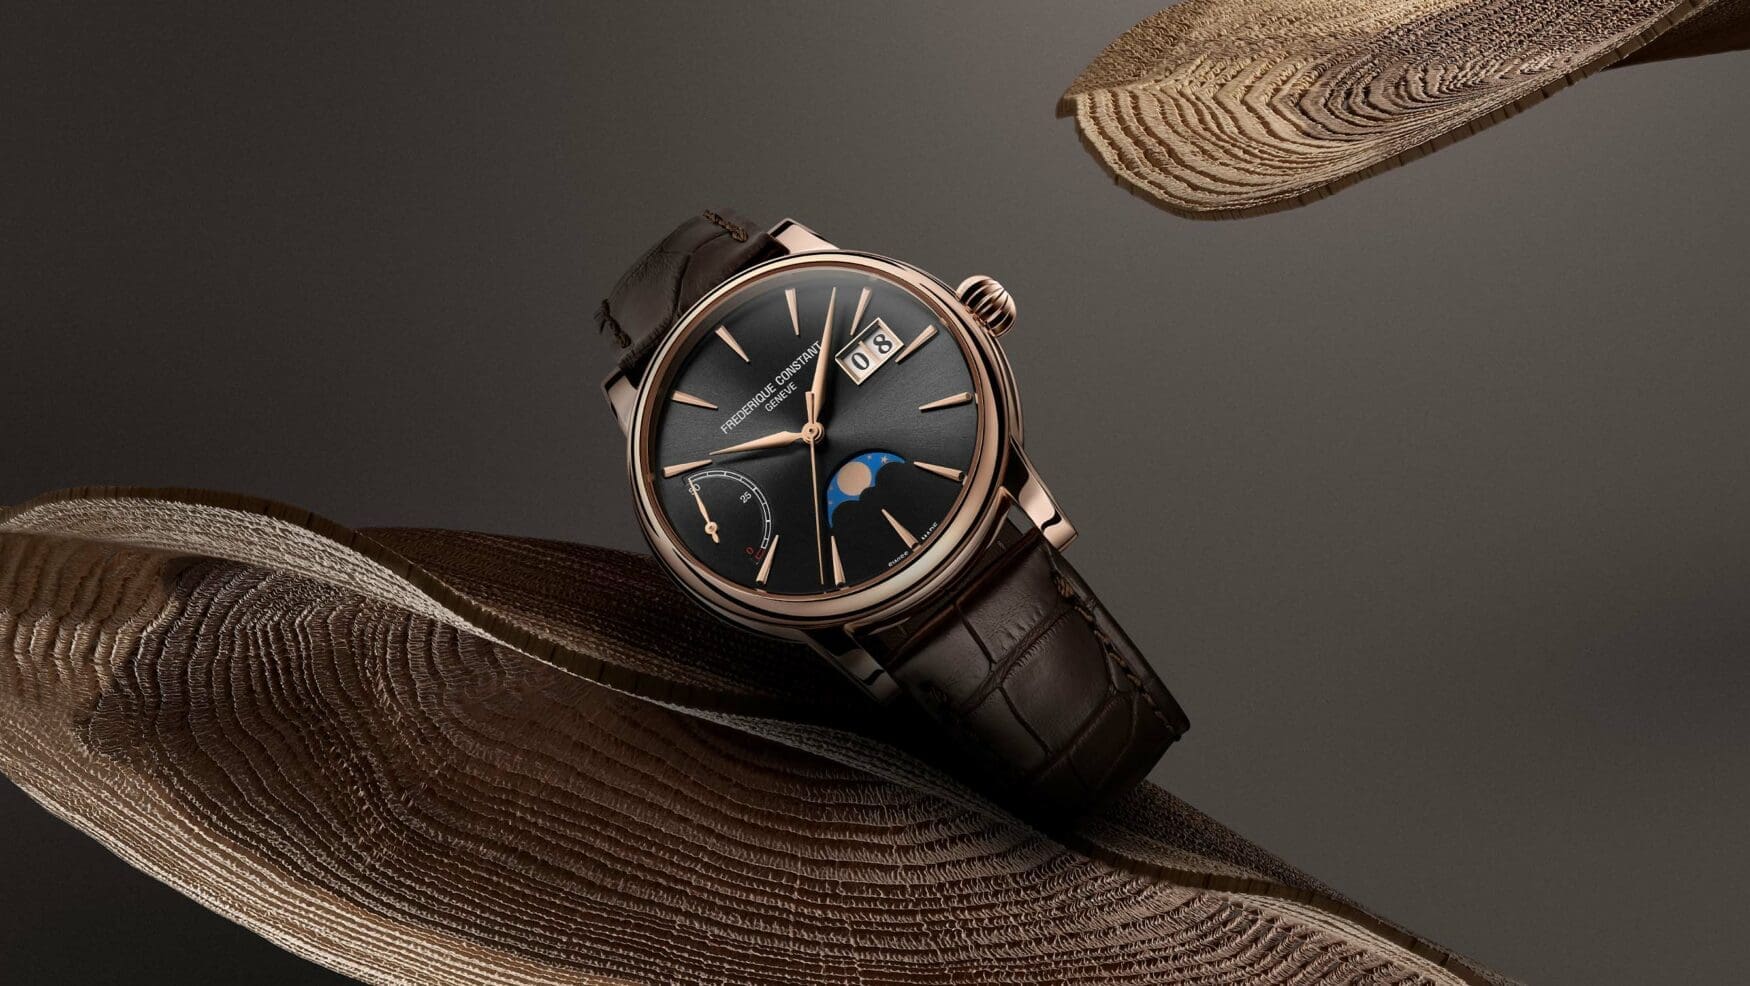 The Frederique Constant Classic Power Reserve Big Date Manufacture is a sign of a brand going upmarket